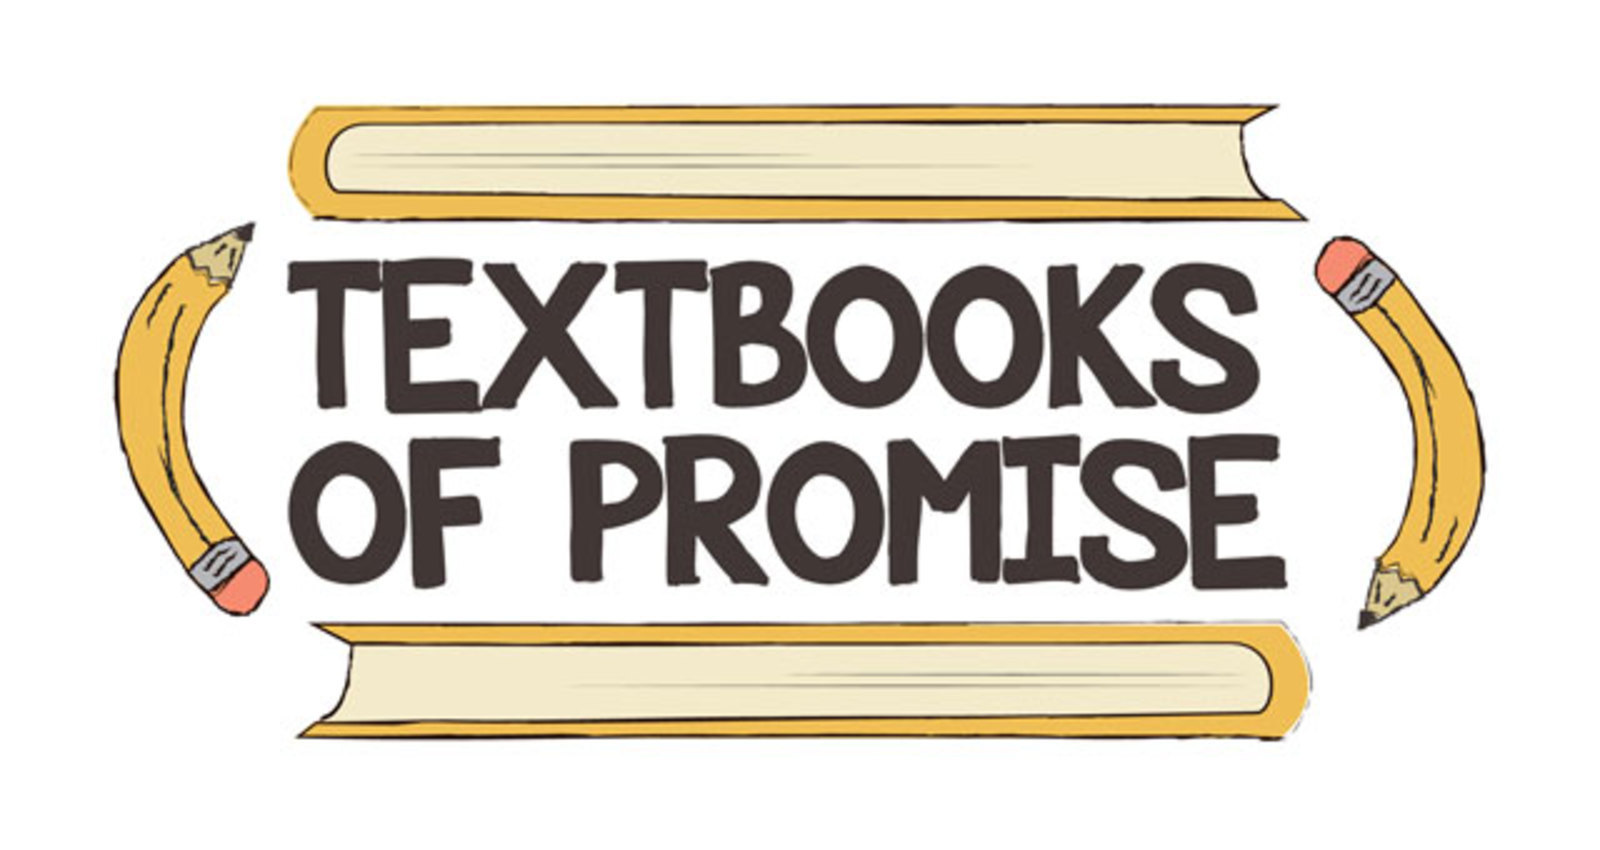 Textbooks of Promise